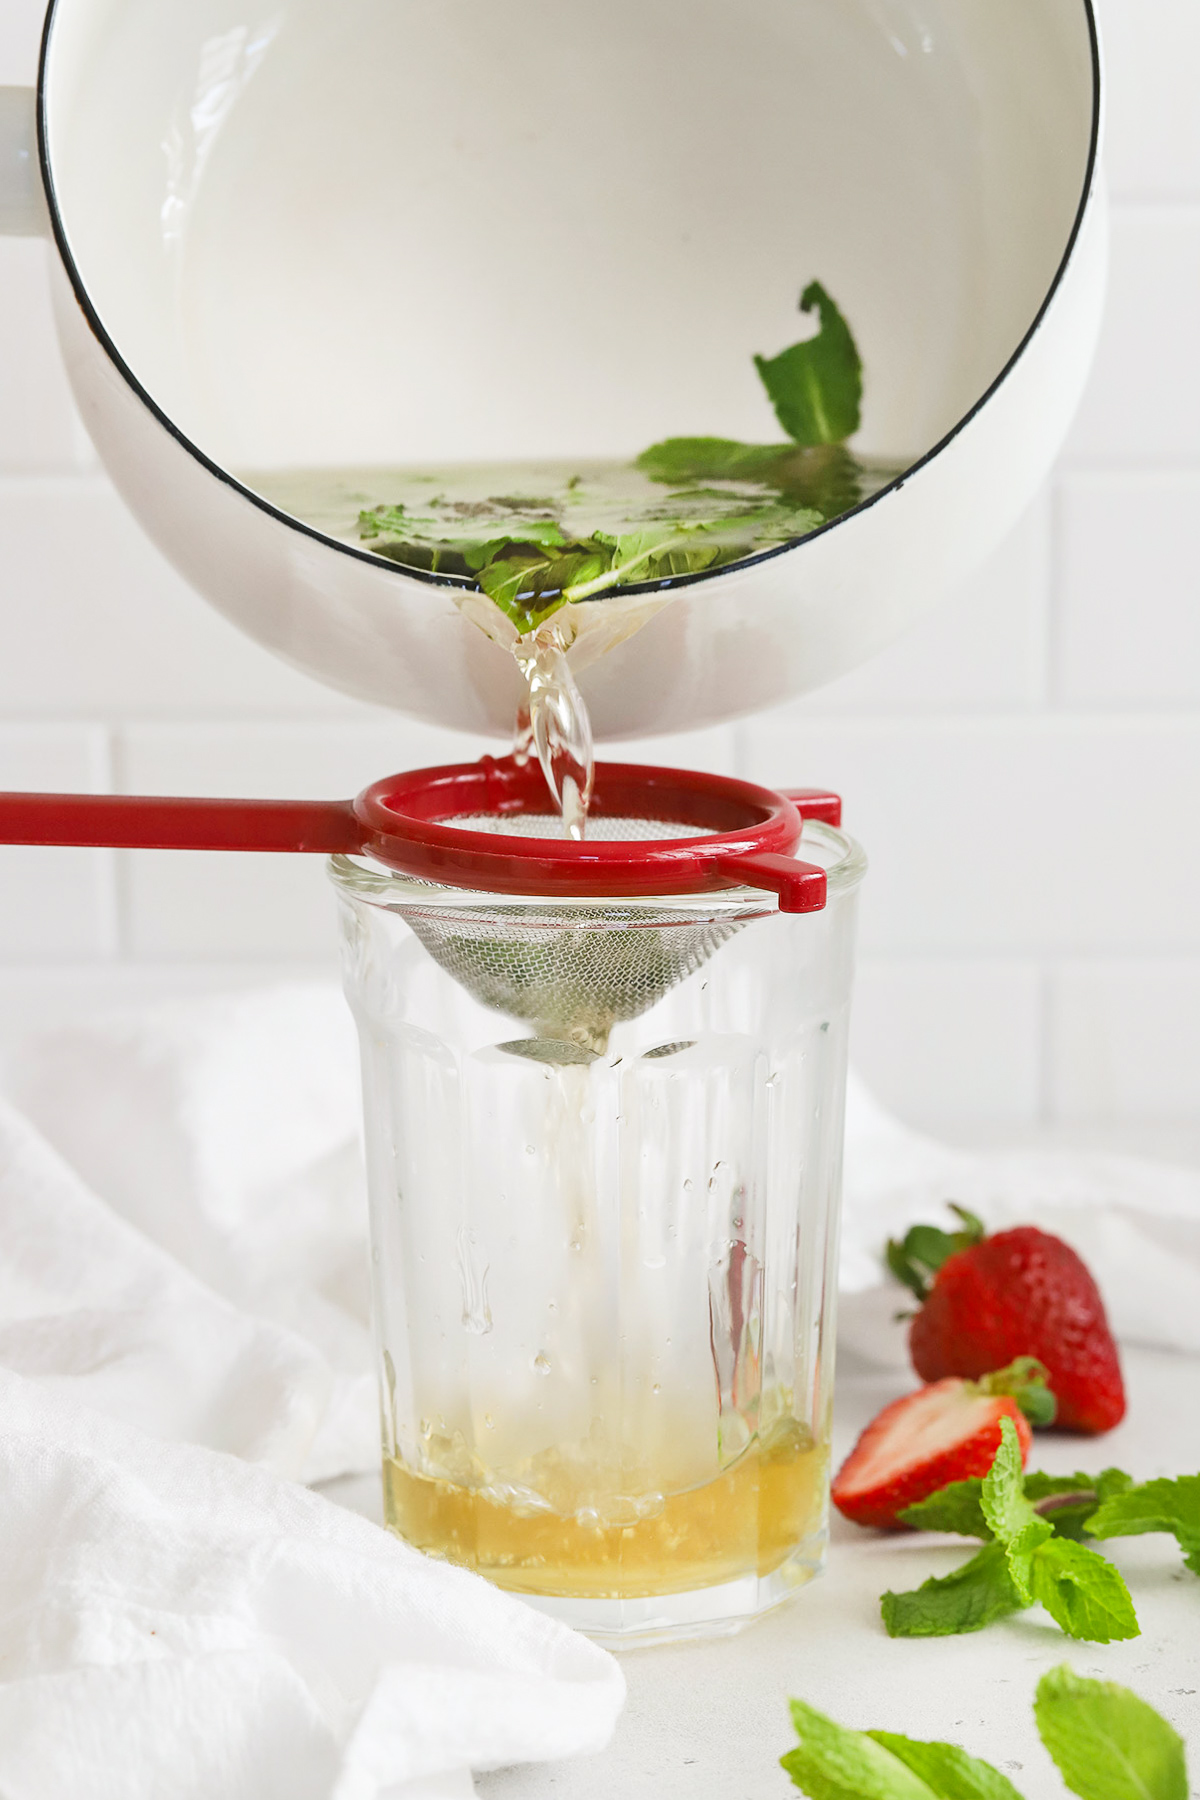 Front view of a saucepan of mint simple syrup being poured through a sieve into a glass container